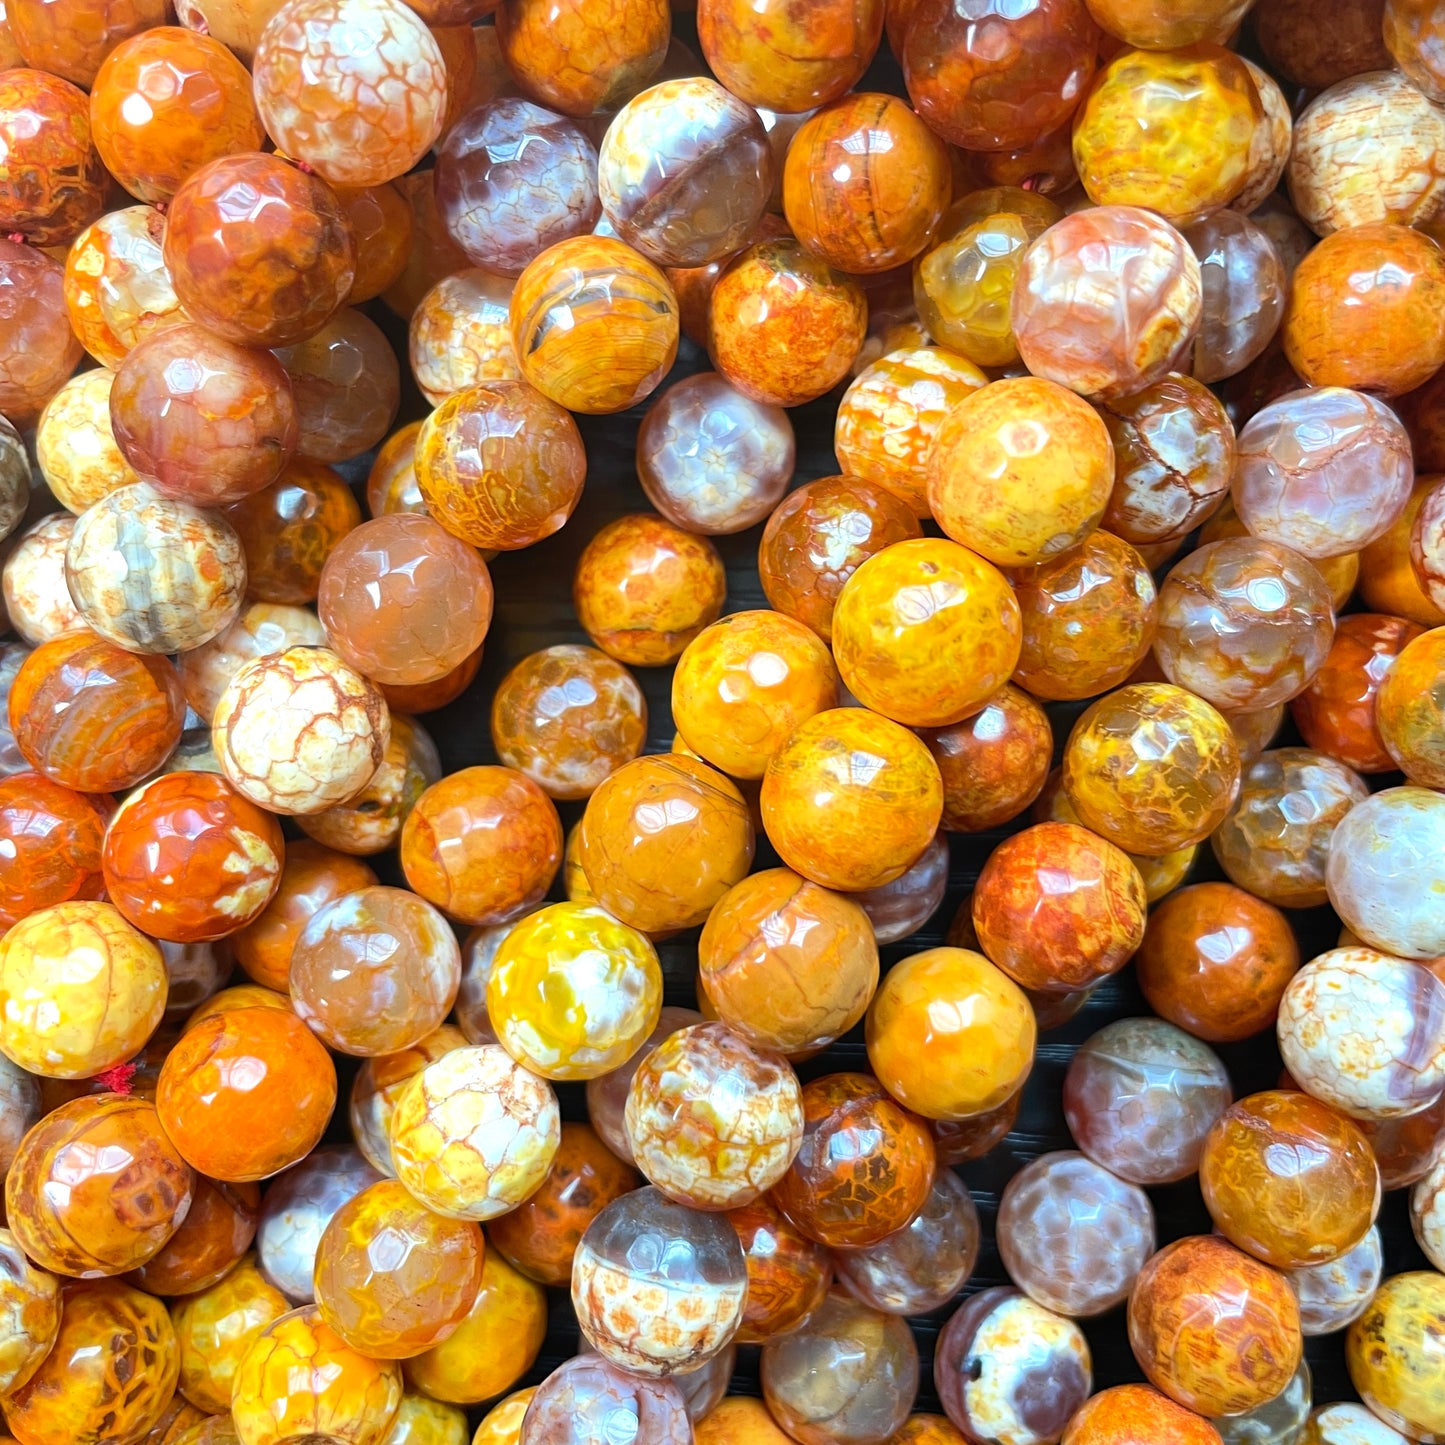 2 Strands/lot 12mm Orange Fire Agate Stone Beads Stone Beads 12mm Stone Beads Faceted Agate Beads New Beads Arrivals Charms Beads Beyond